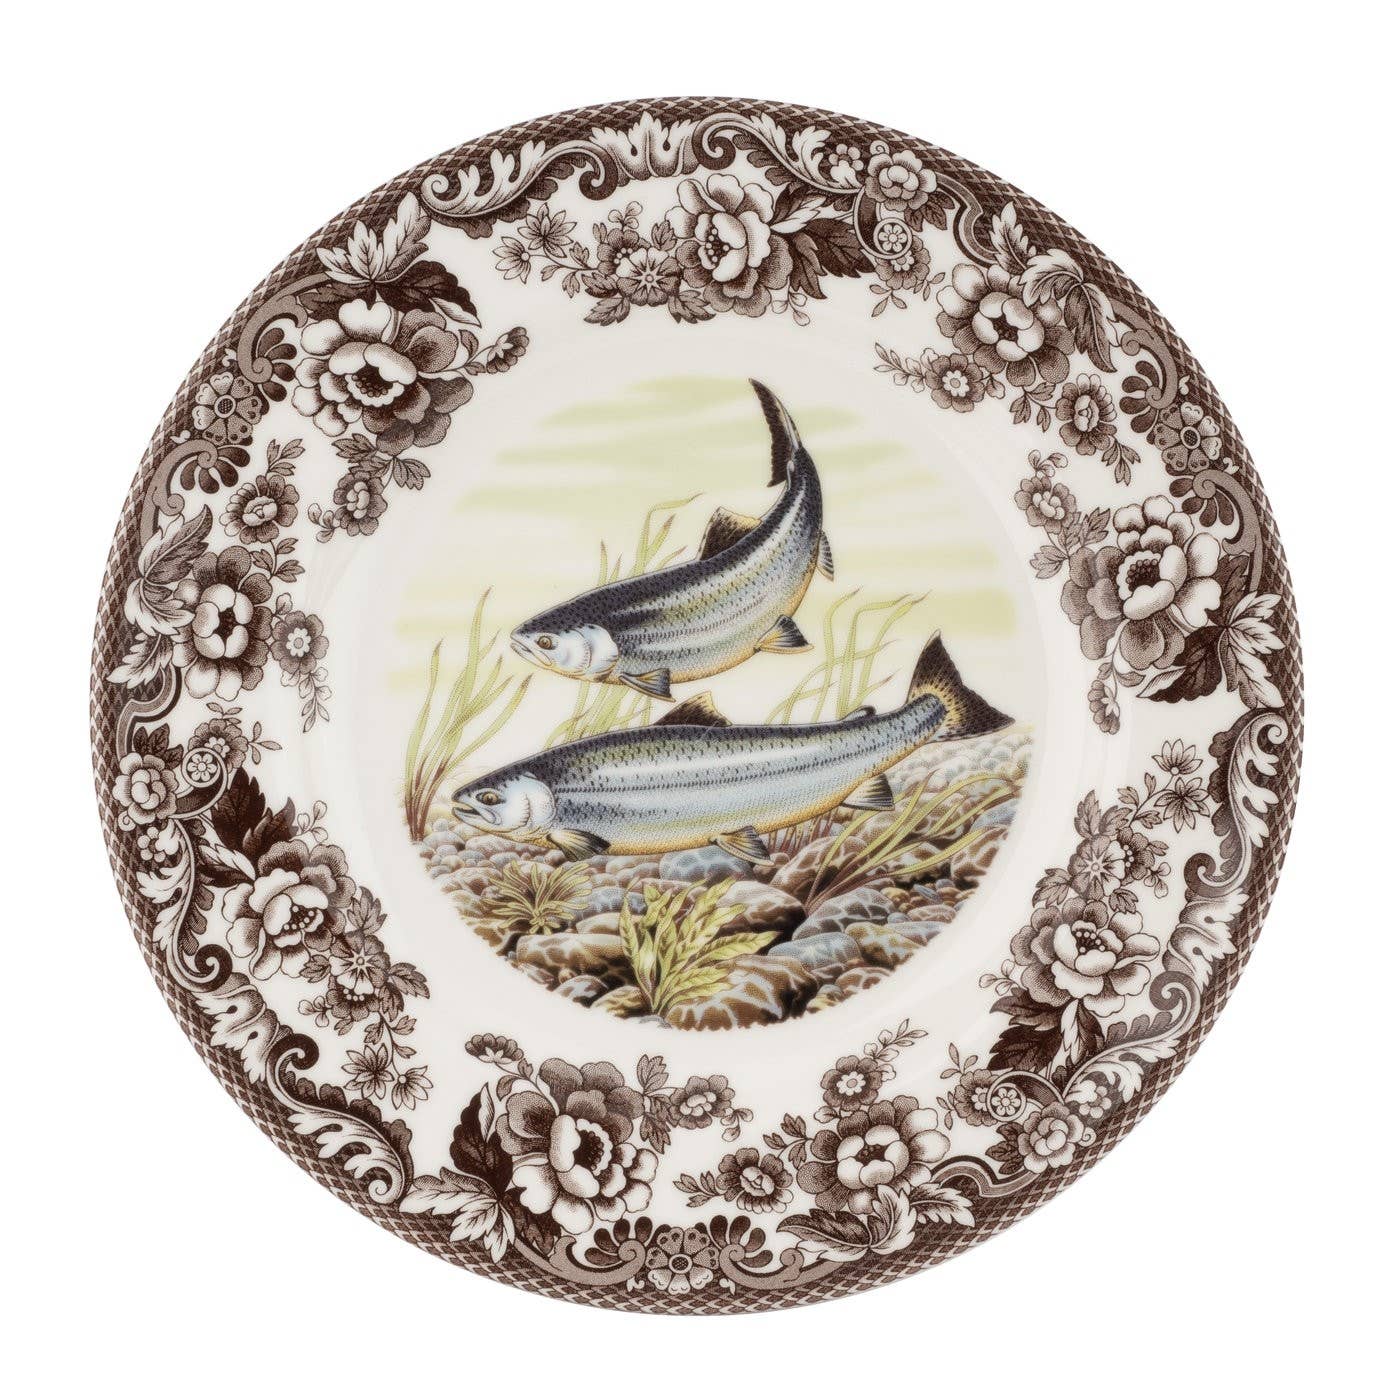 Spode Woodland Dinner Plates (12 Styles Available)